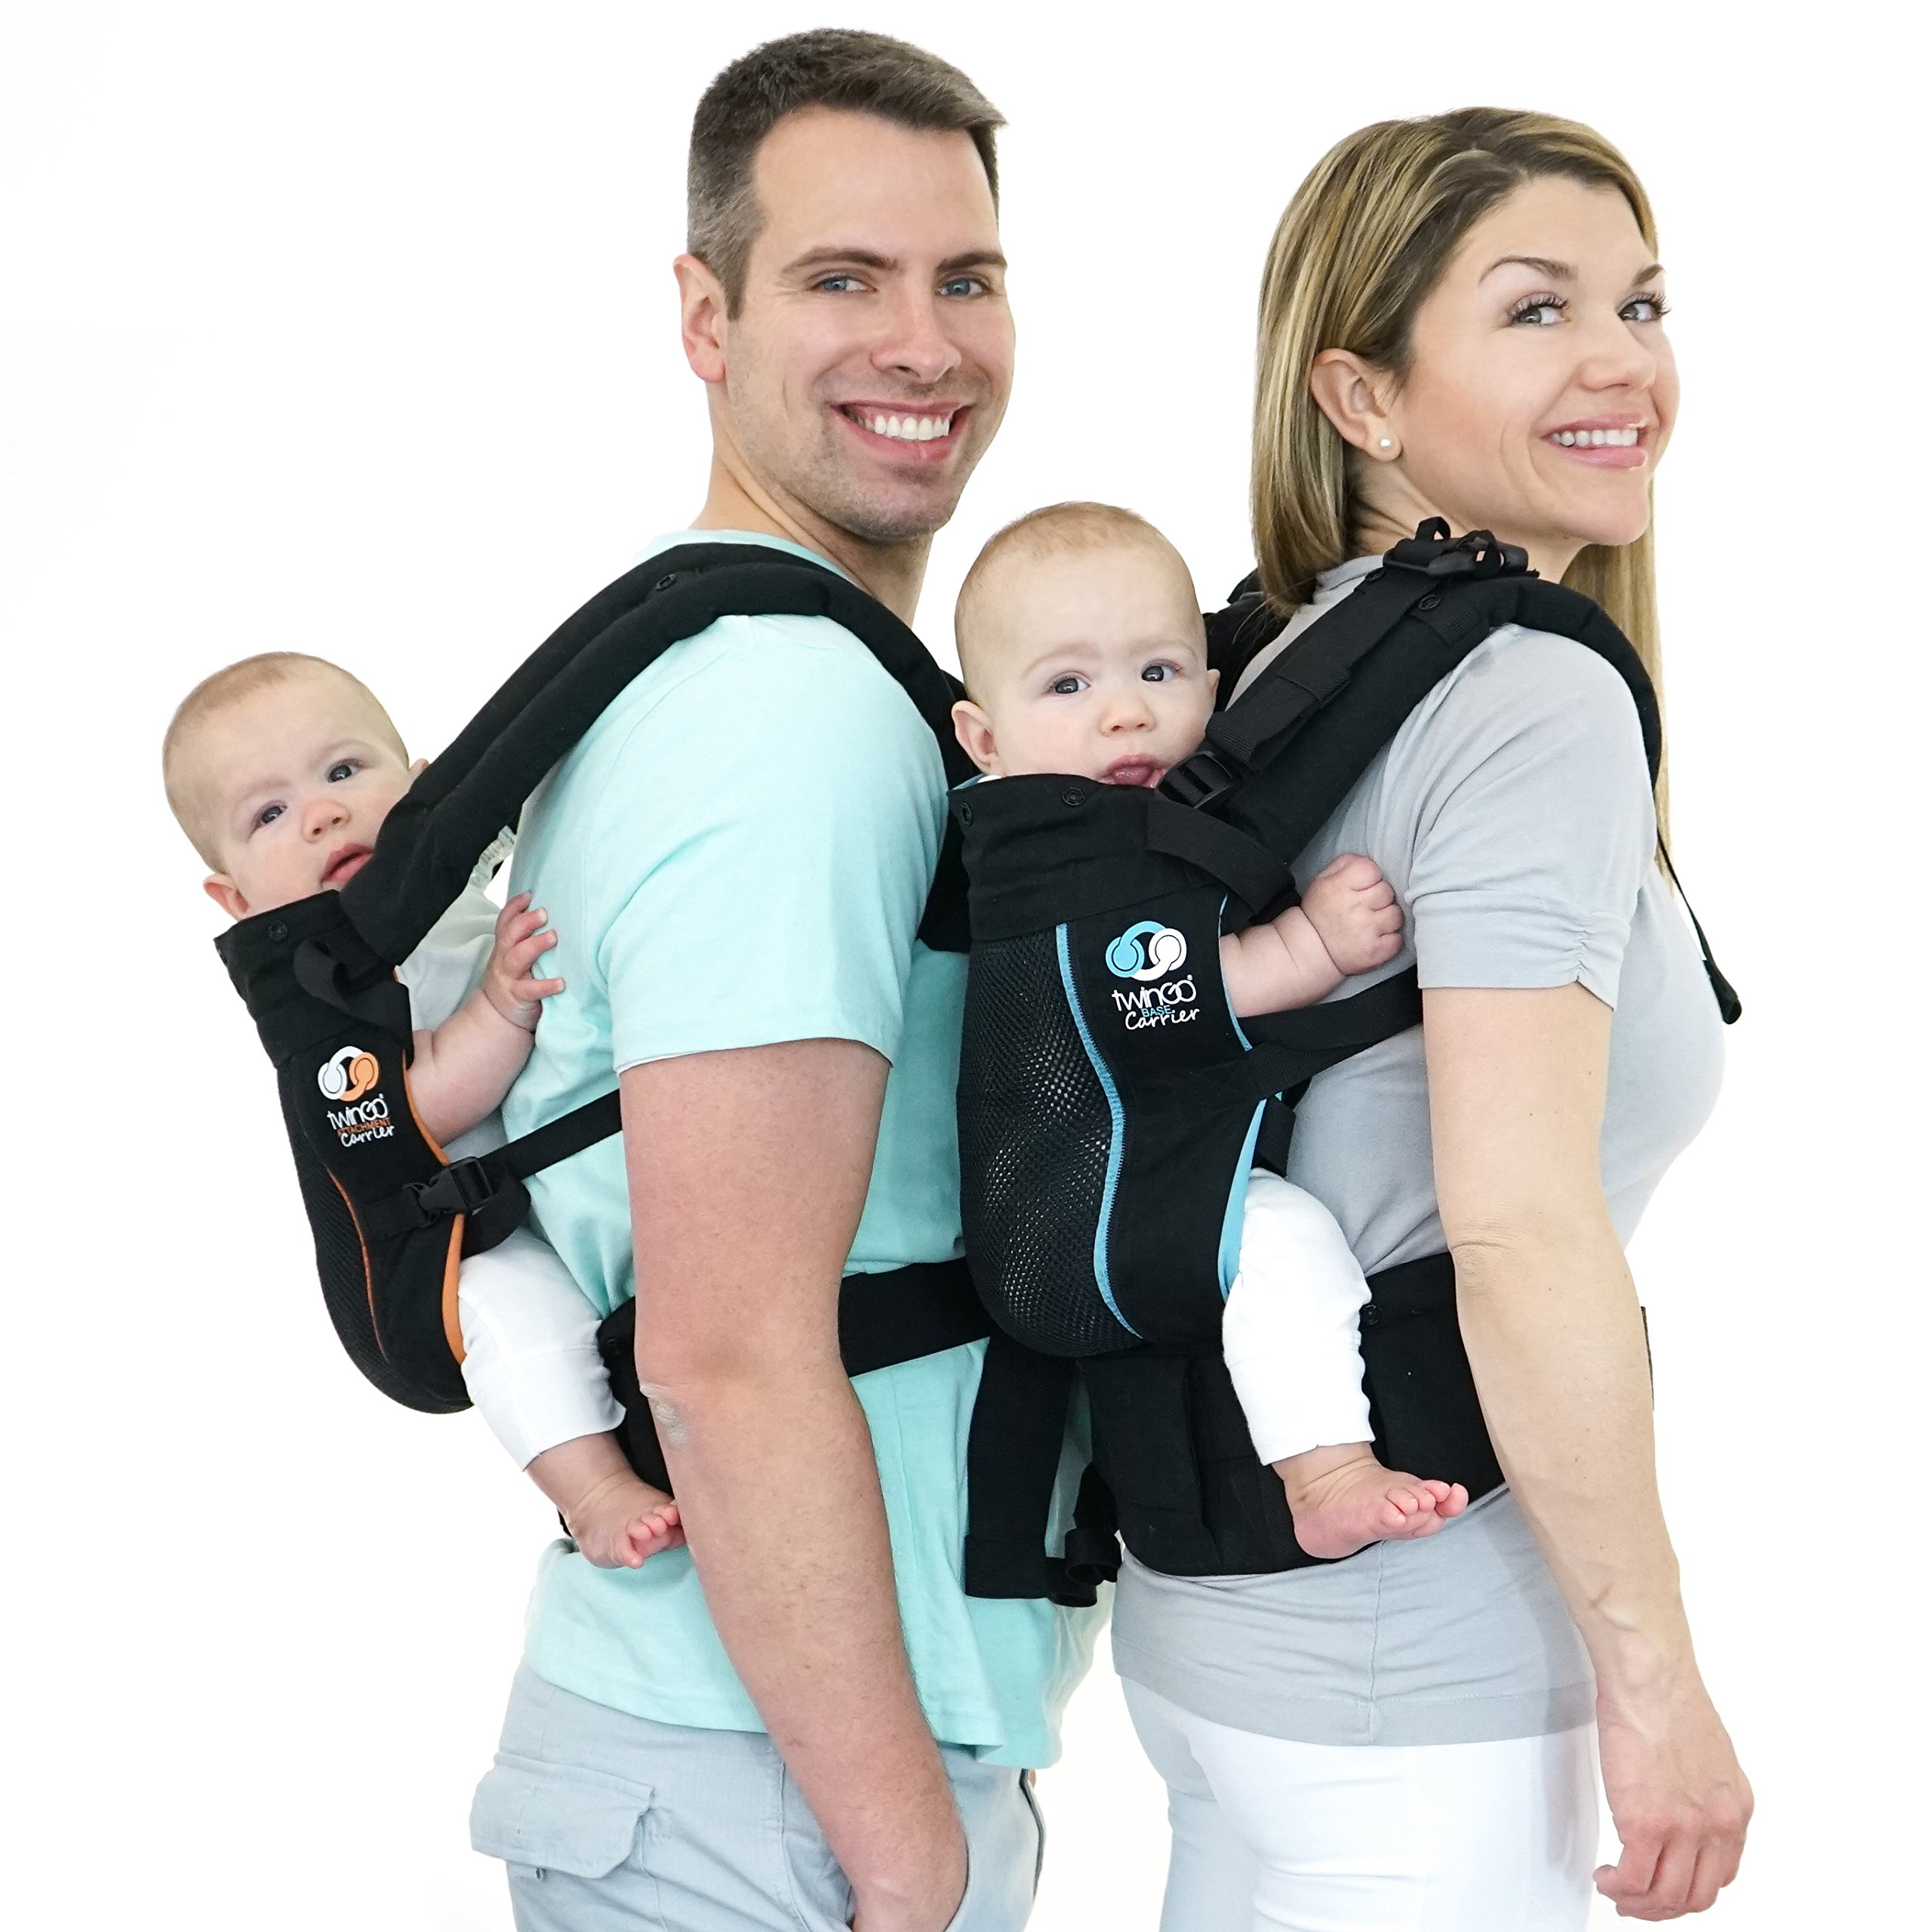 TwinGo Carrier - Air Model - Classic Black - Great for All Seasons - Breathable Mesh - Fully Adjustable Tandem or 2 Single Baby Carrier for Men, Woman, Twins and Babies 10-45 lbs